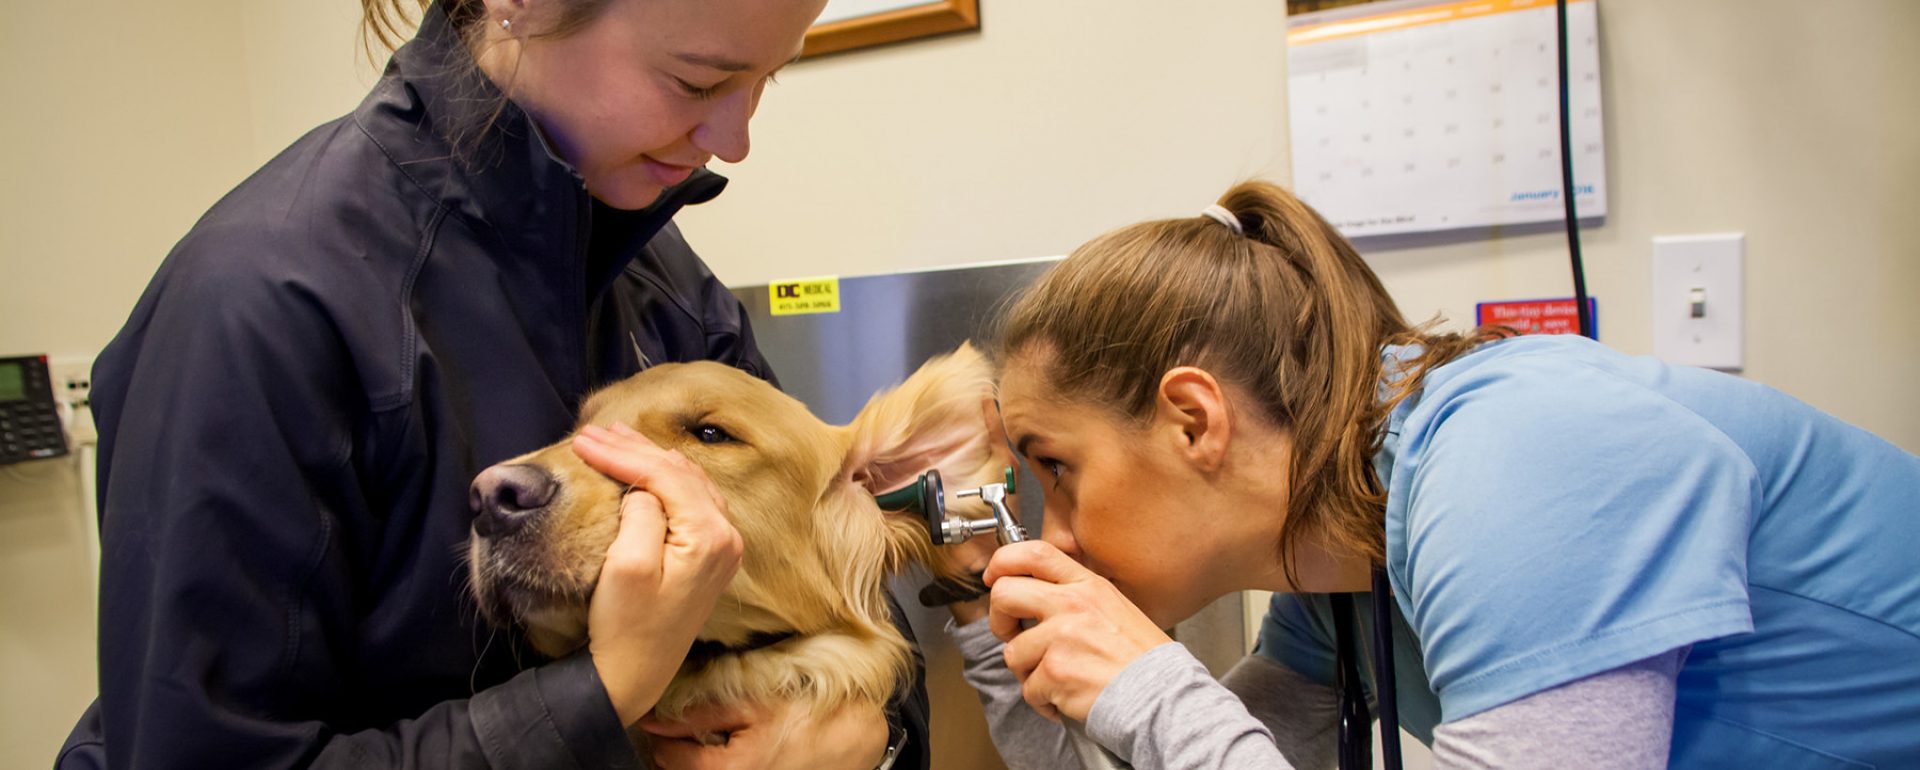 A female GDB staff veterinarian examines the ear of a Golden Retriever (whose face is being held by a volunteer) in the vet clinic